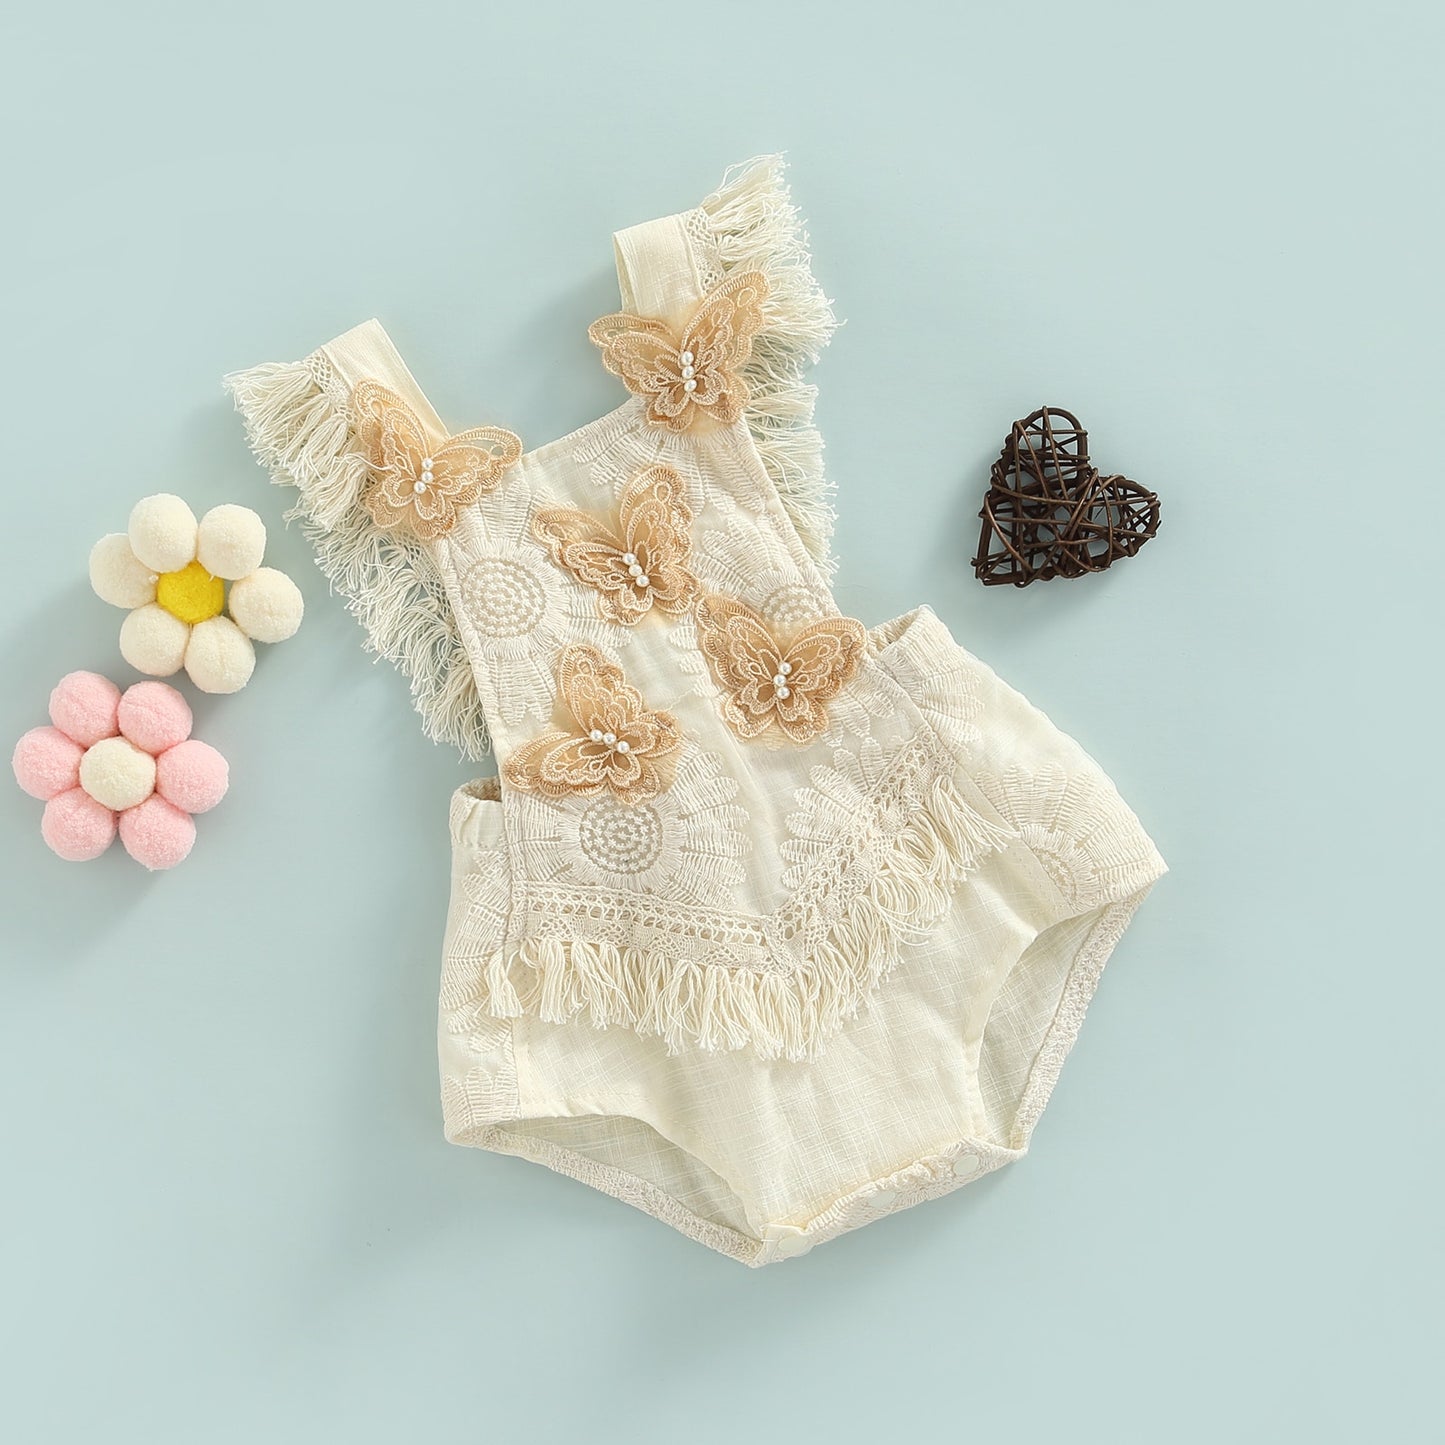 Sleeveless Lace Butterfly Romper